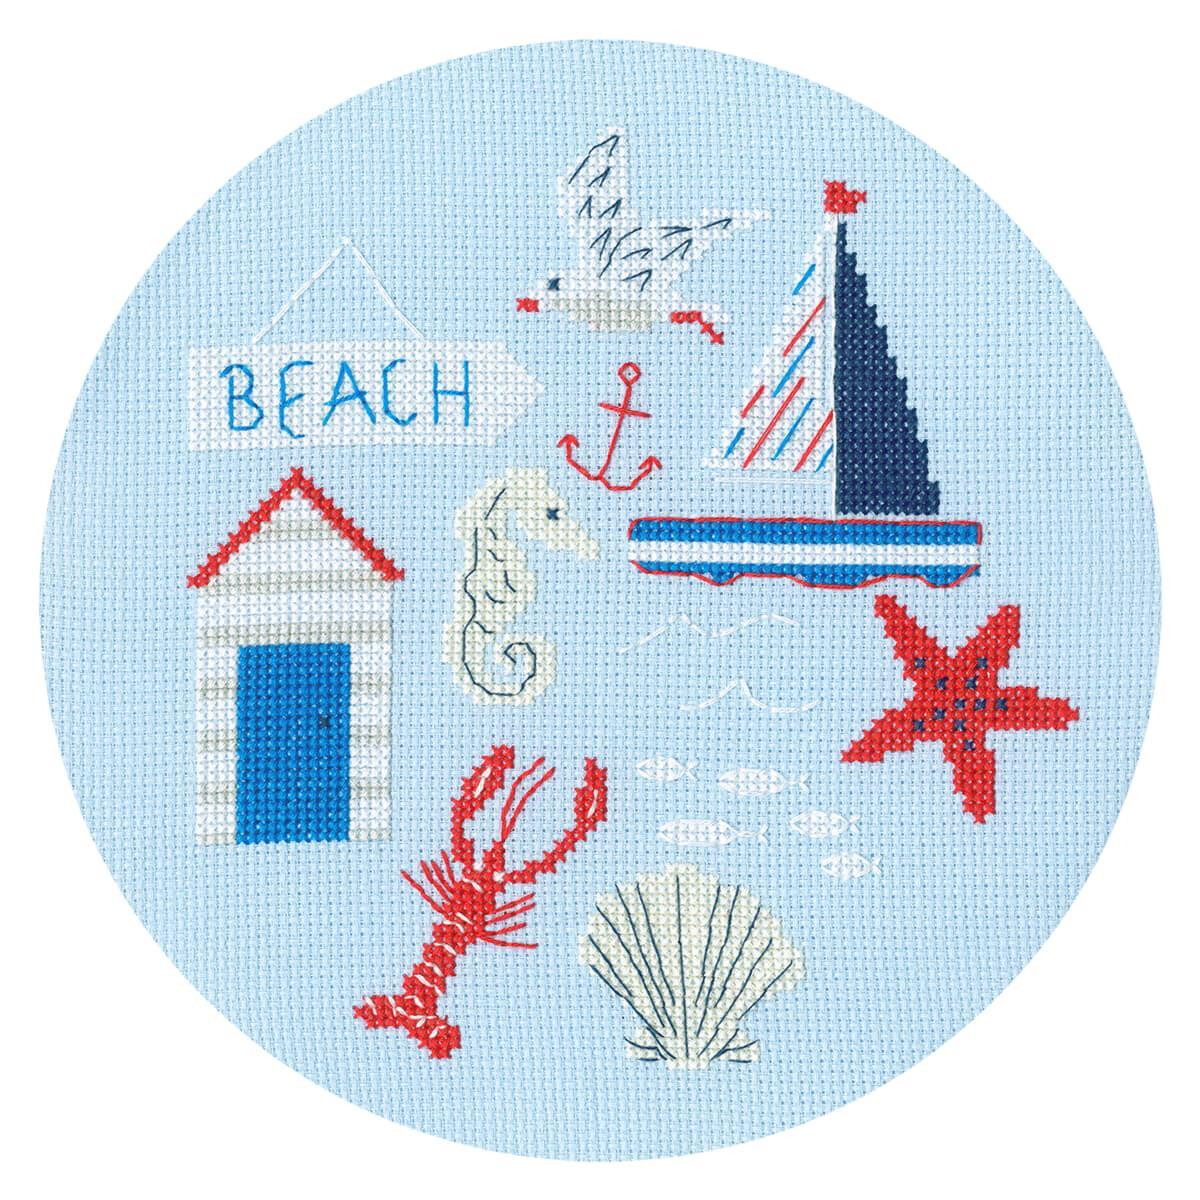 A round cross stitch pattern or embroidery picture with a...